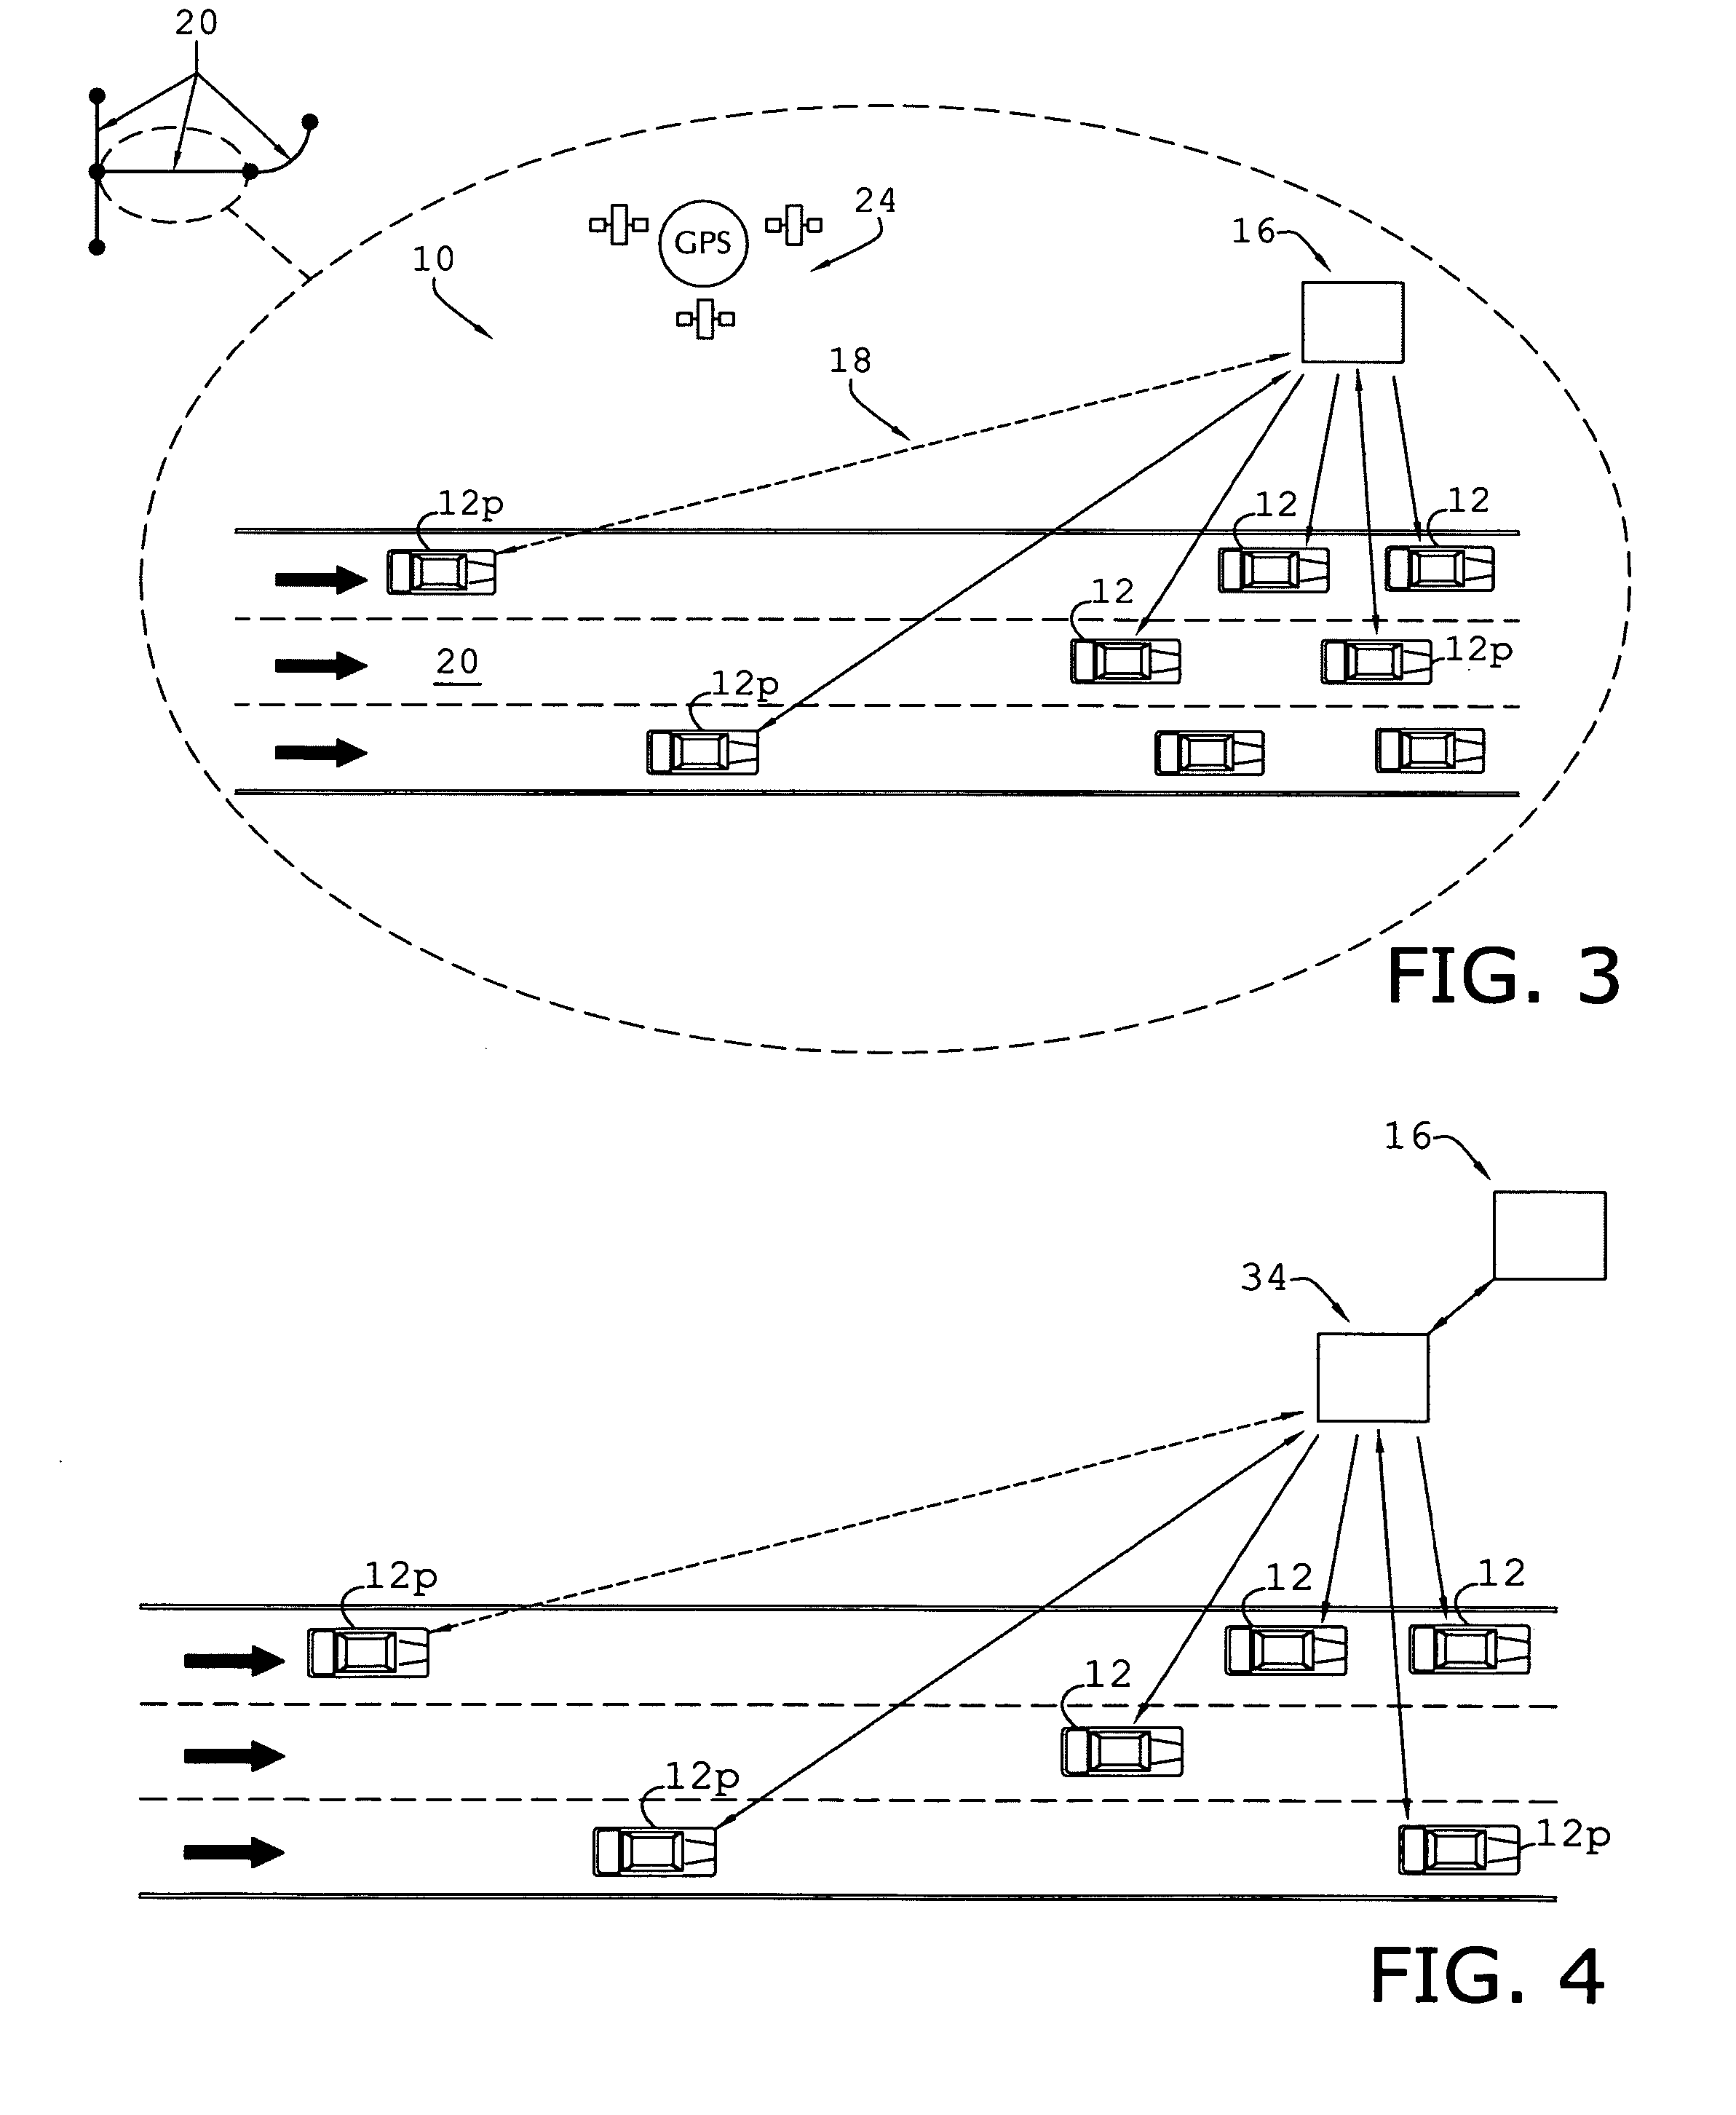 System for and method of monitoring real time traffic conditions using probe vehicles